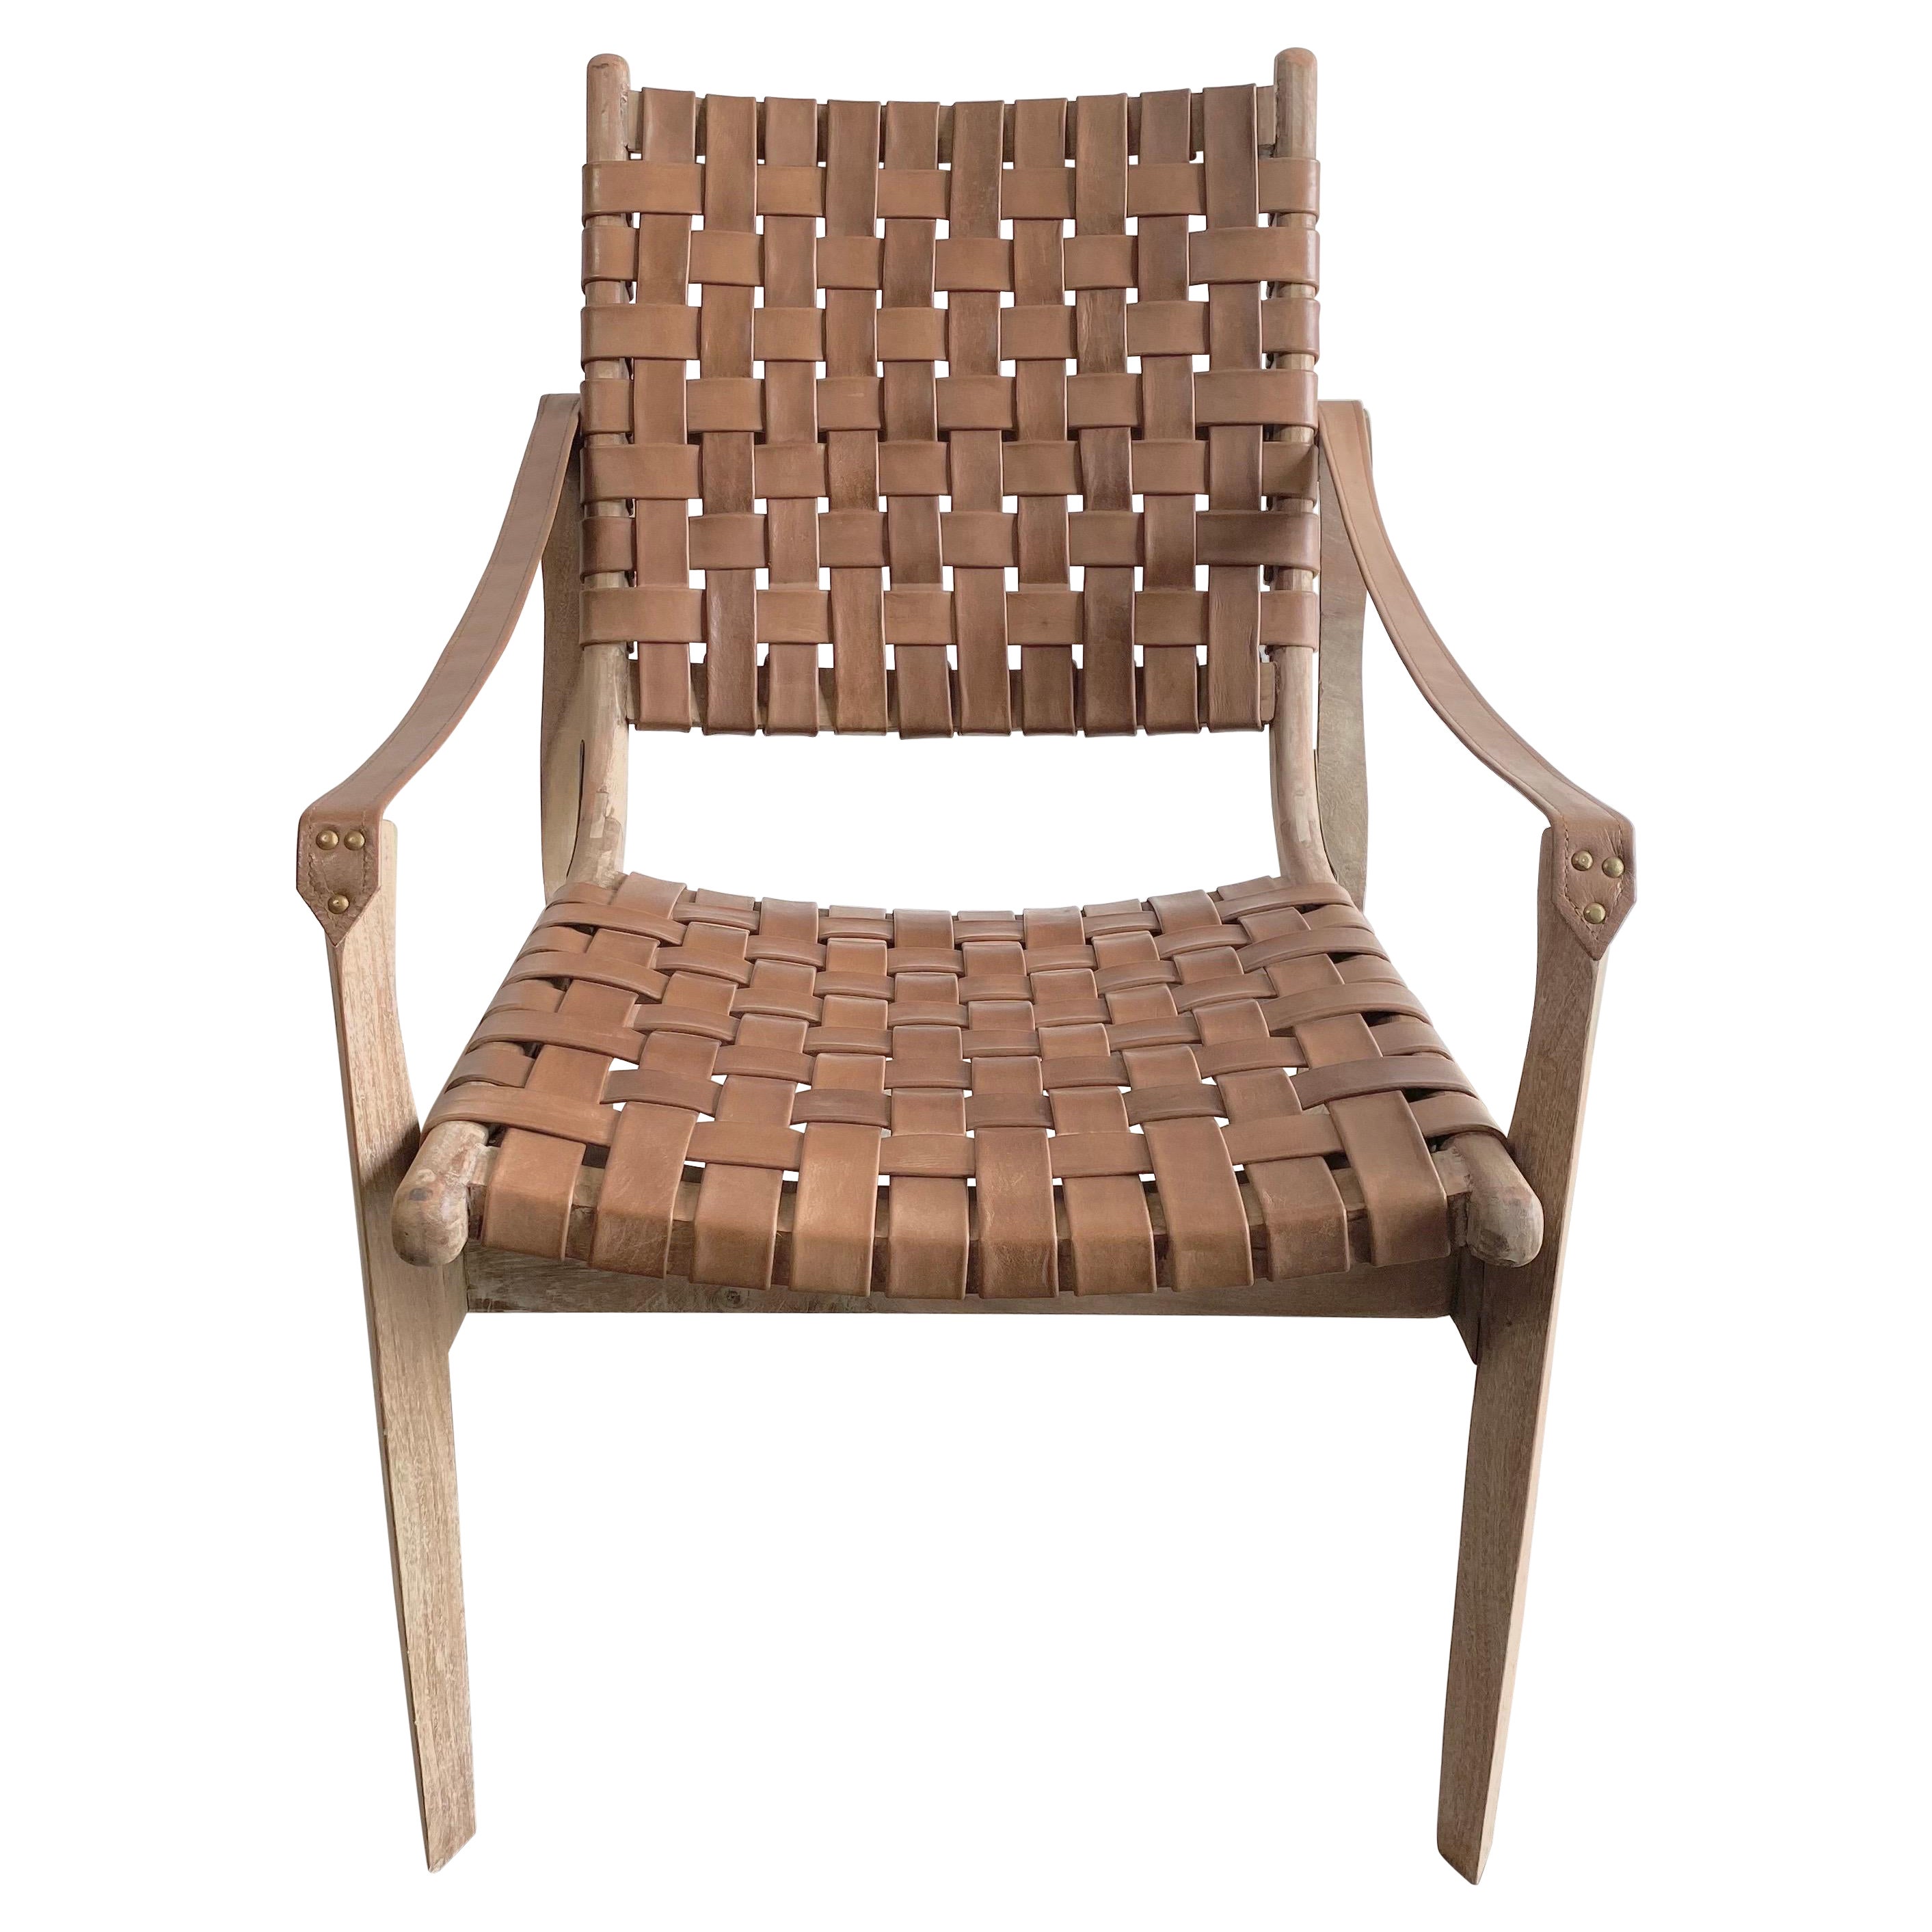 Modern Woven Leather Strap Teak Wood Chair For Sale